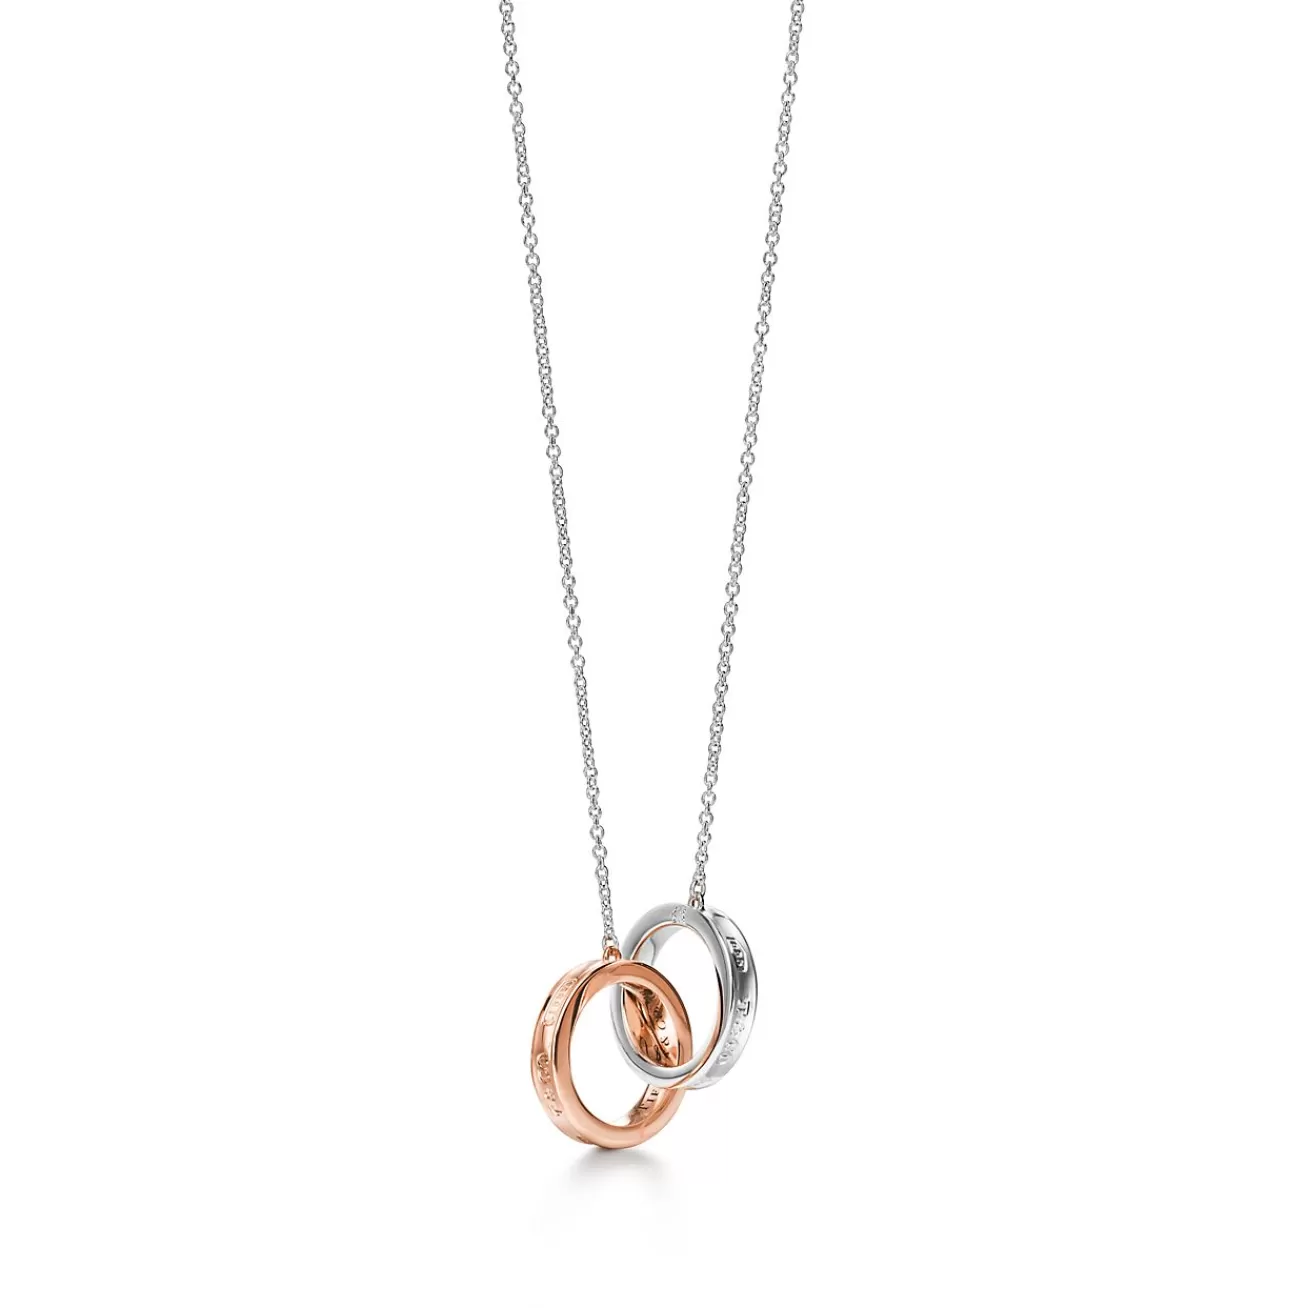 Tiffany & Co. Tiffany 1837® interlocking circles pendant in sterling silver and 18k rose gold. | ^ Necklaces & Pendants | Gifts for Her